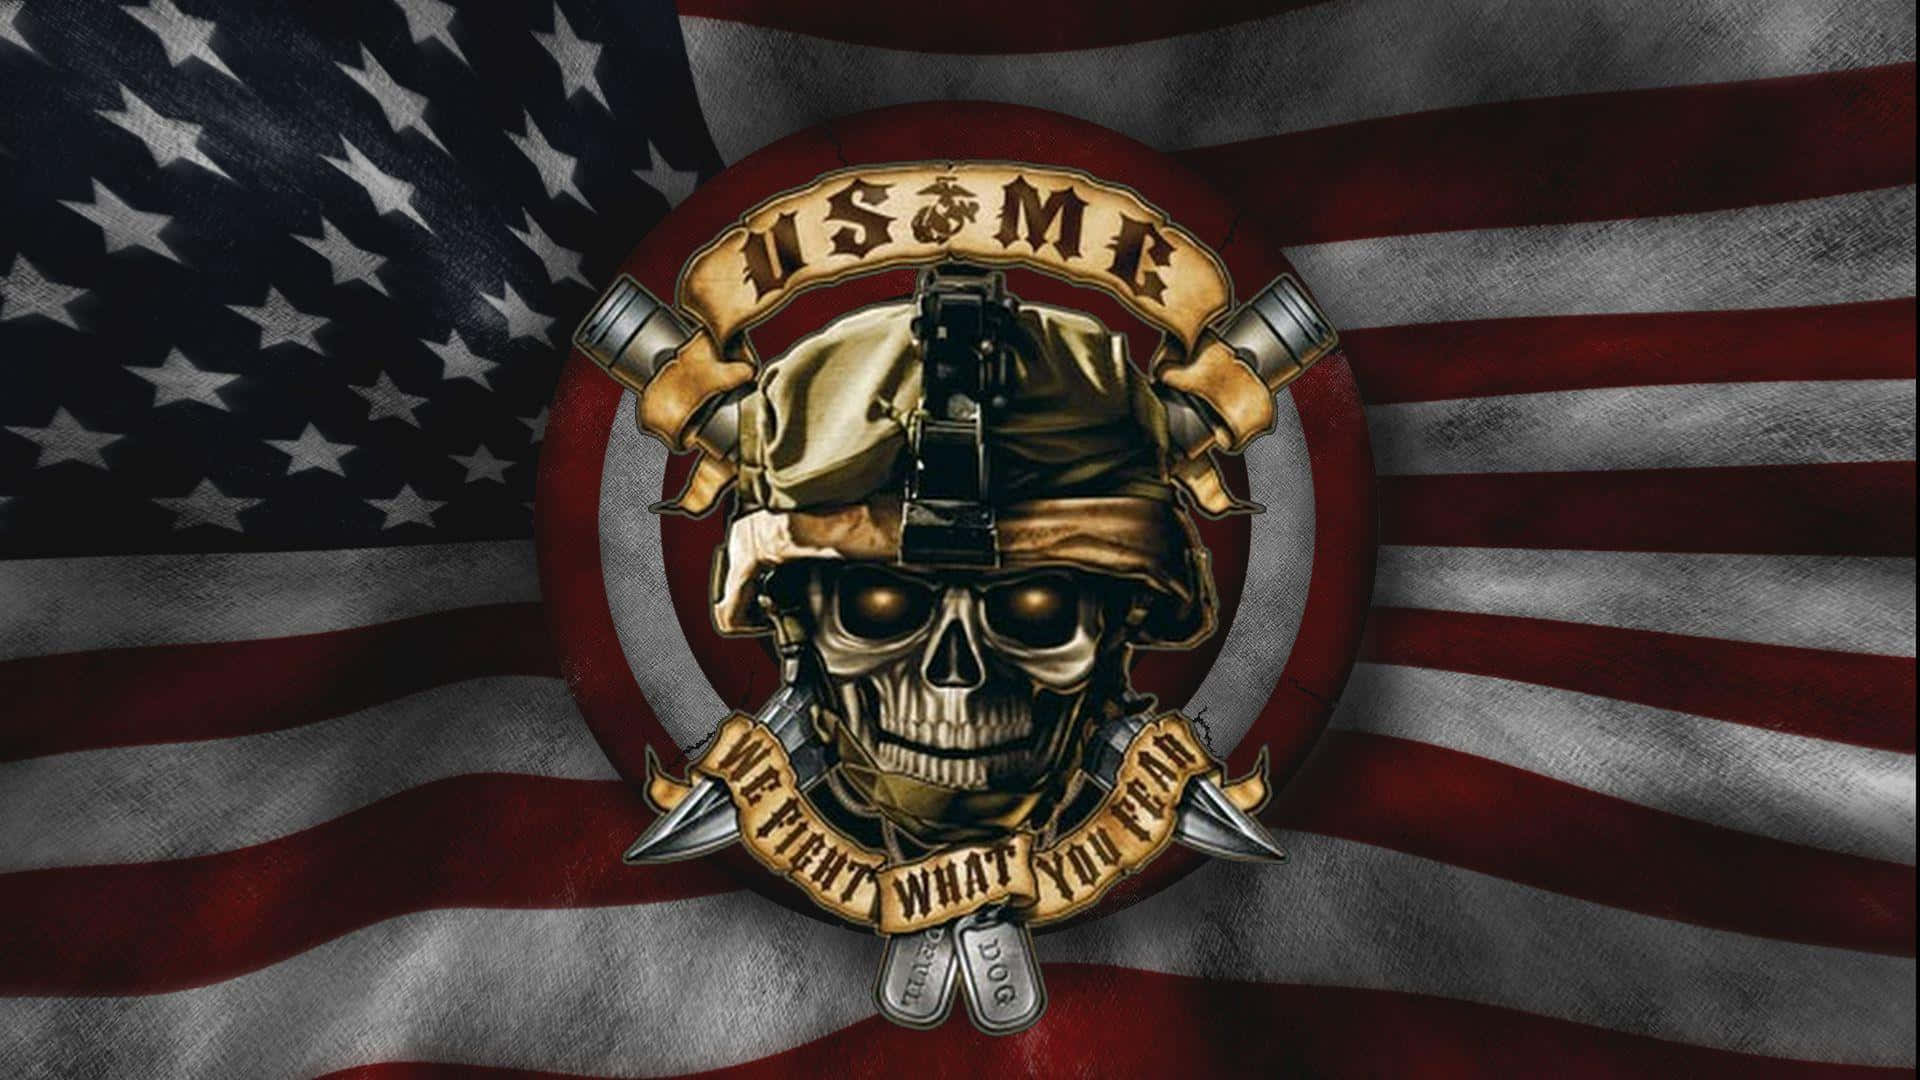 A brave and courageous member of the United States Marine Corps Wallpaper